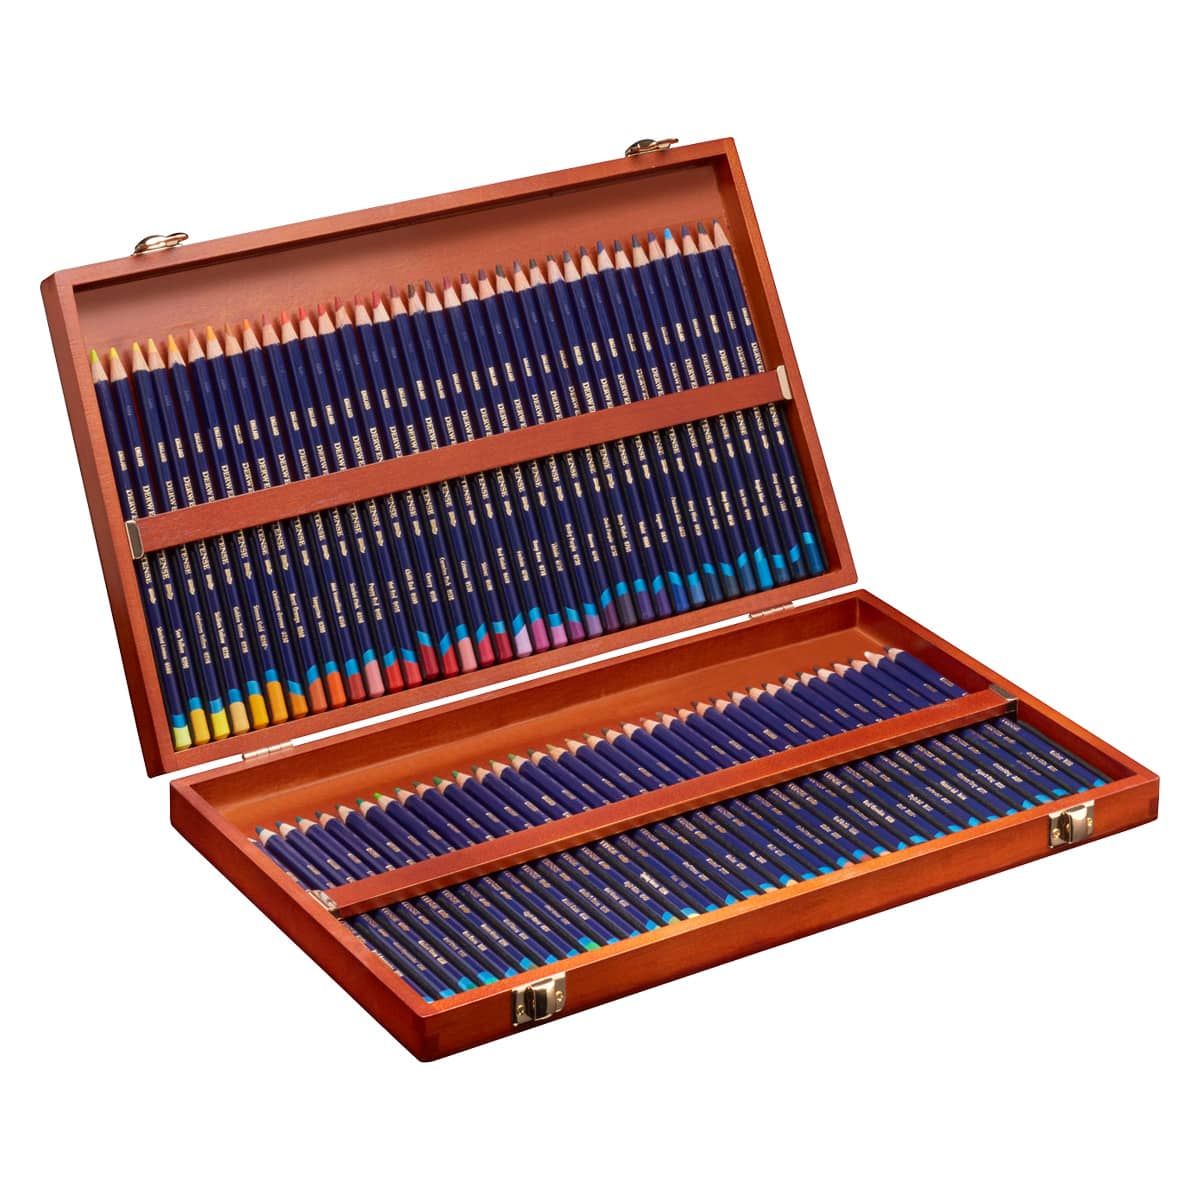 Derwent Inktense Colored Pencils - Assorted Colors, Wood Box Set of 72